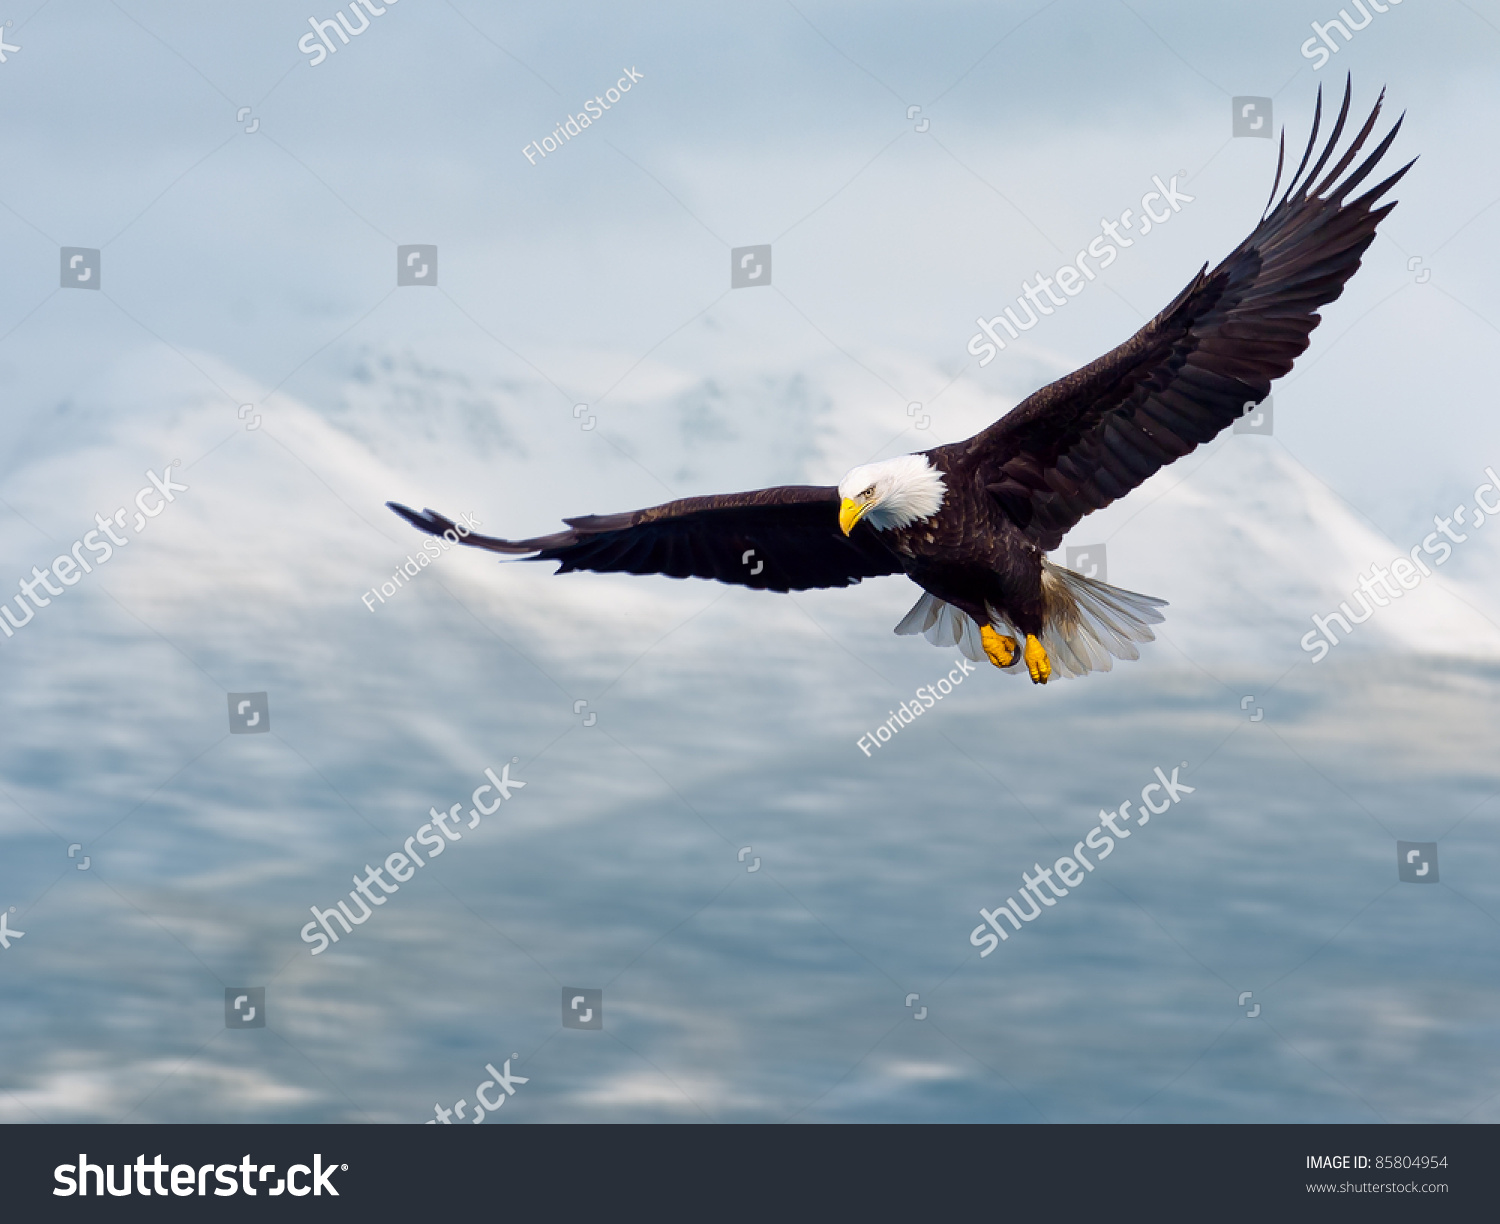 american bald eagle in flight and illustrated over alaska coastal mountains in winter, nice light on face #85804954